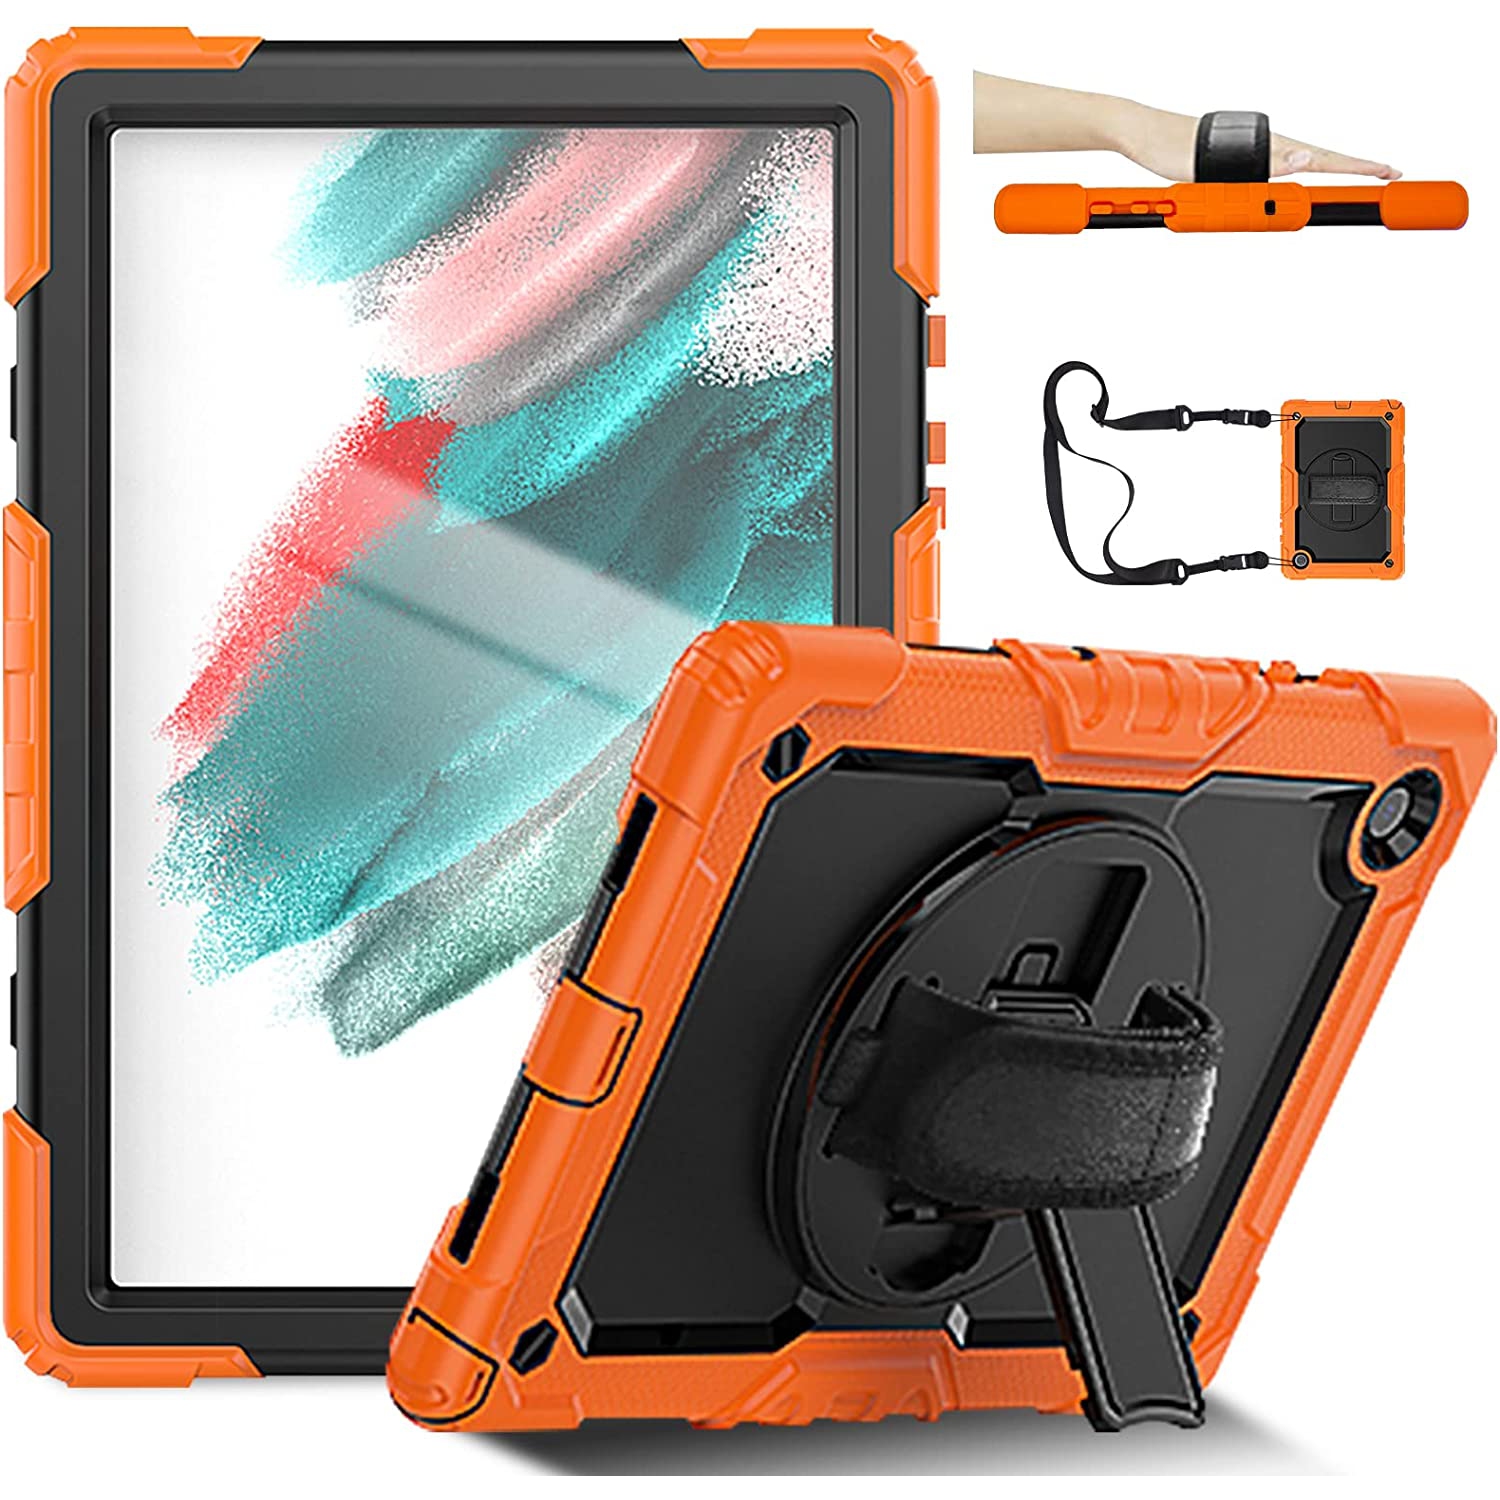 C Case for Samsung Galaxy Tab A8 10.5 Inch 2022 , Case with Screen Protector Pencil Holder , Hand Strap Shoulder Strap , Kids Shockproof Silicone Rugged Cover Tablet Tab A8 (Orange